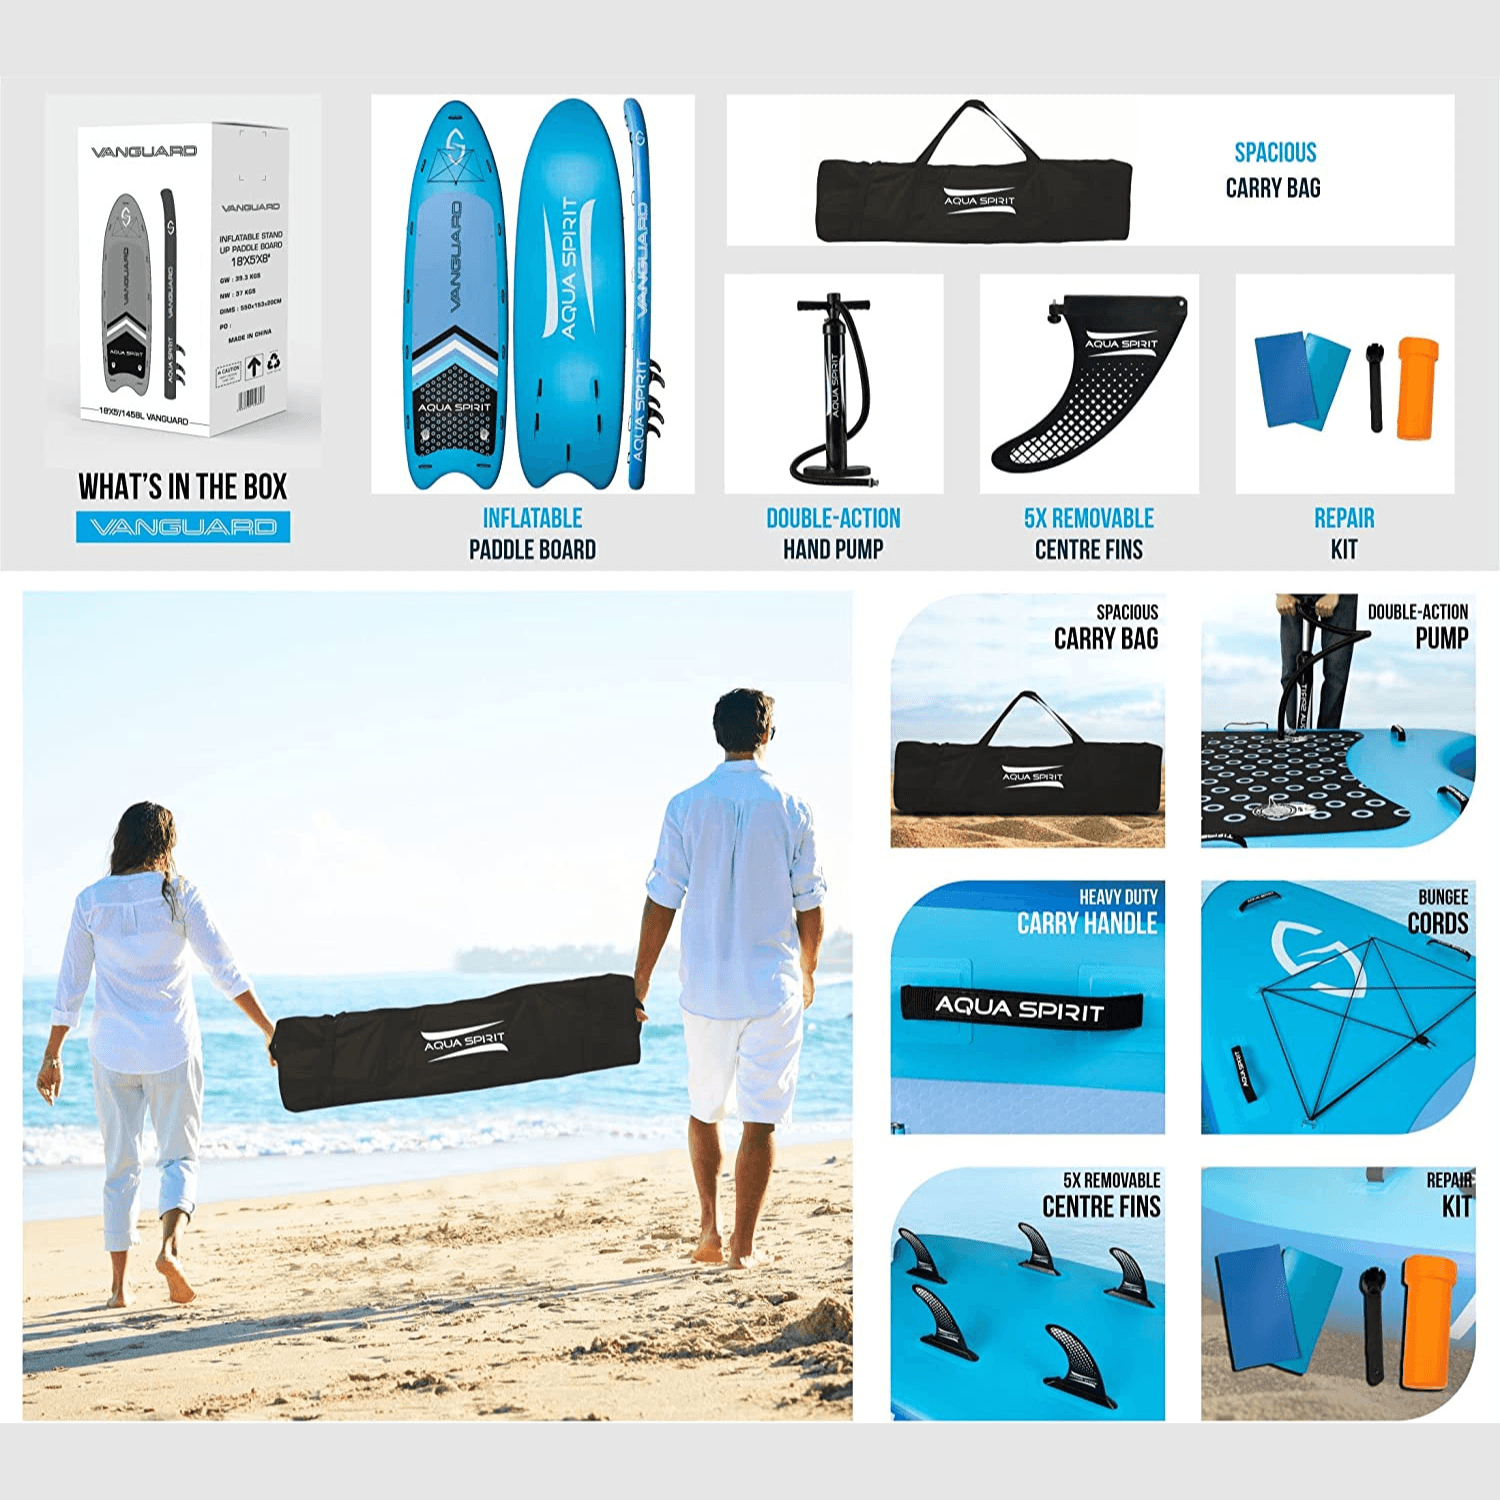 Aqua Spirit Vanguard Family Inflatable SUP for Group Adventures, 18' x 5’ x 8” with Carry Bag, Double-Action Pump and more accessories, Up To 10 Person, 500KG Limit, 1 Year Warranty - Aqua Spirit iSUPs UK